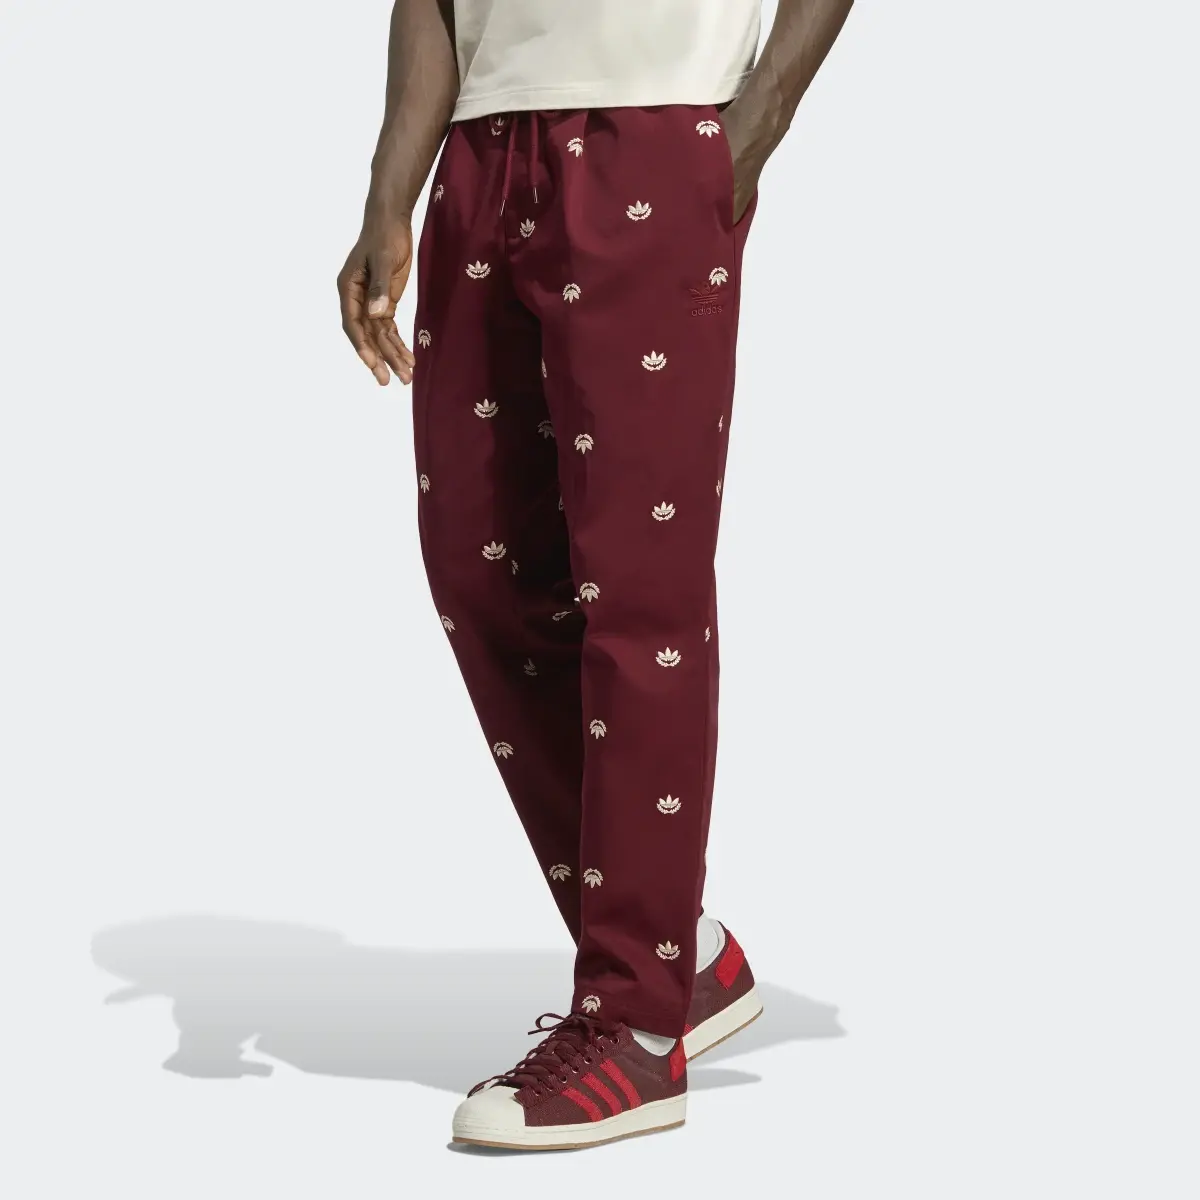 Adidas Graphics Archive Chino Trousers. 1